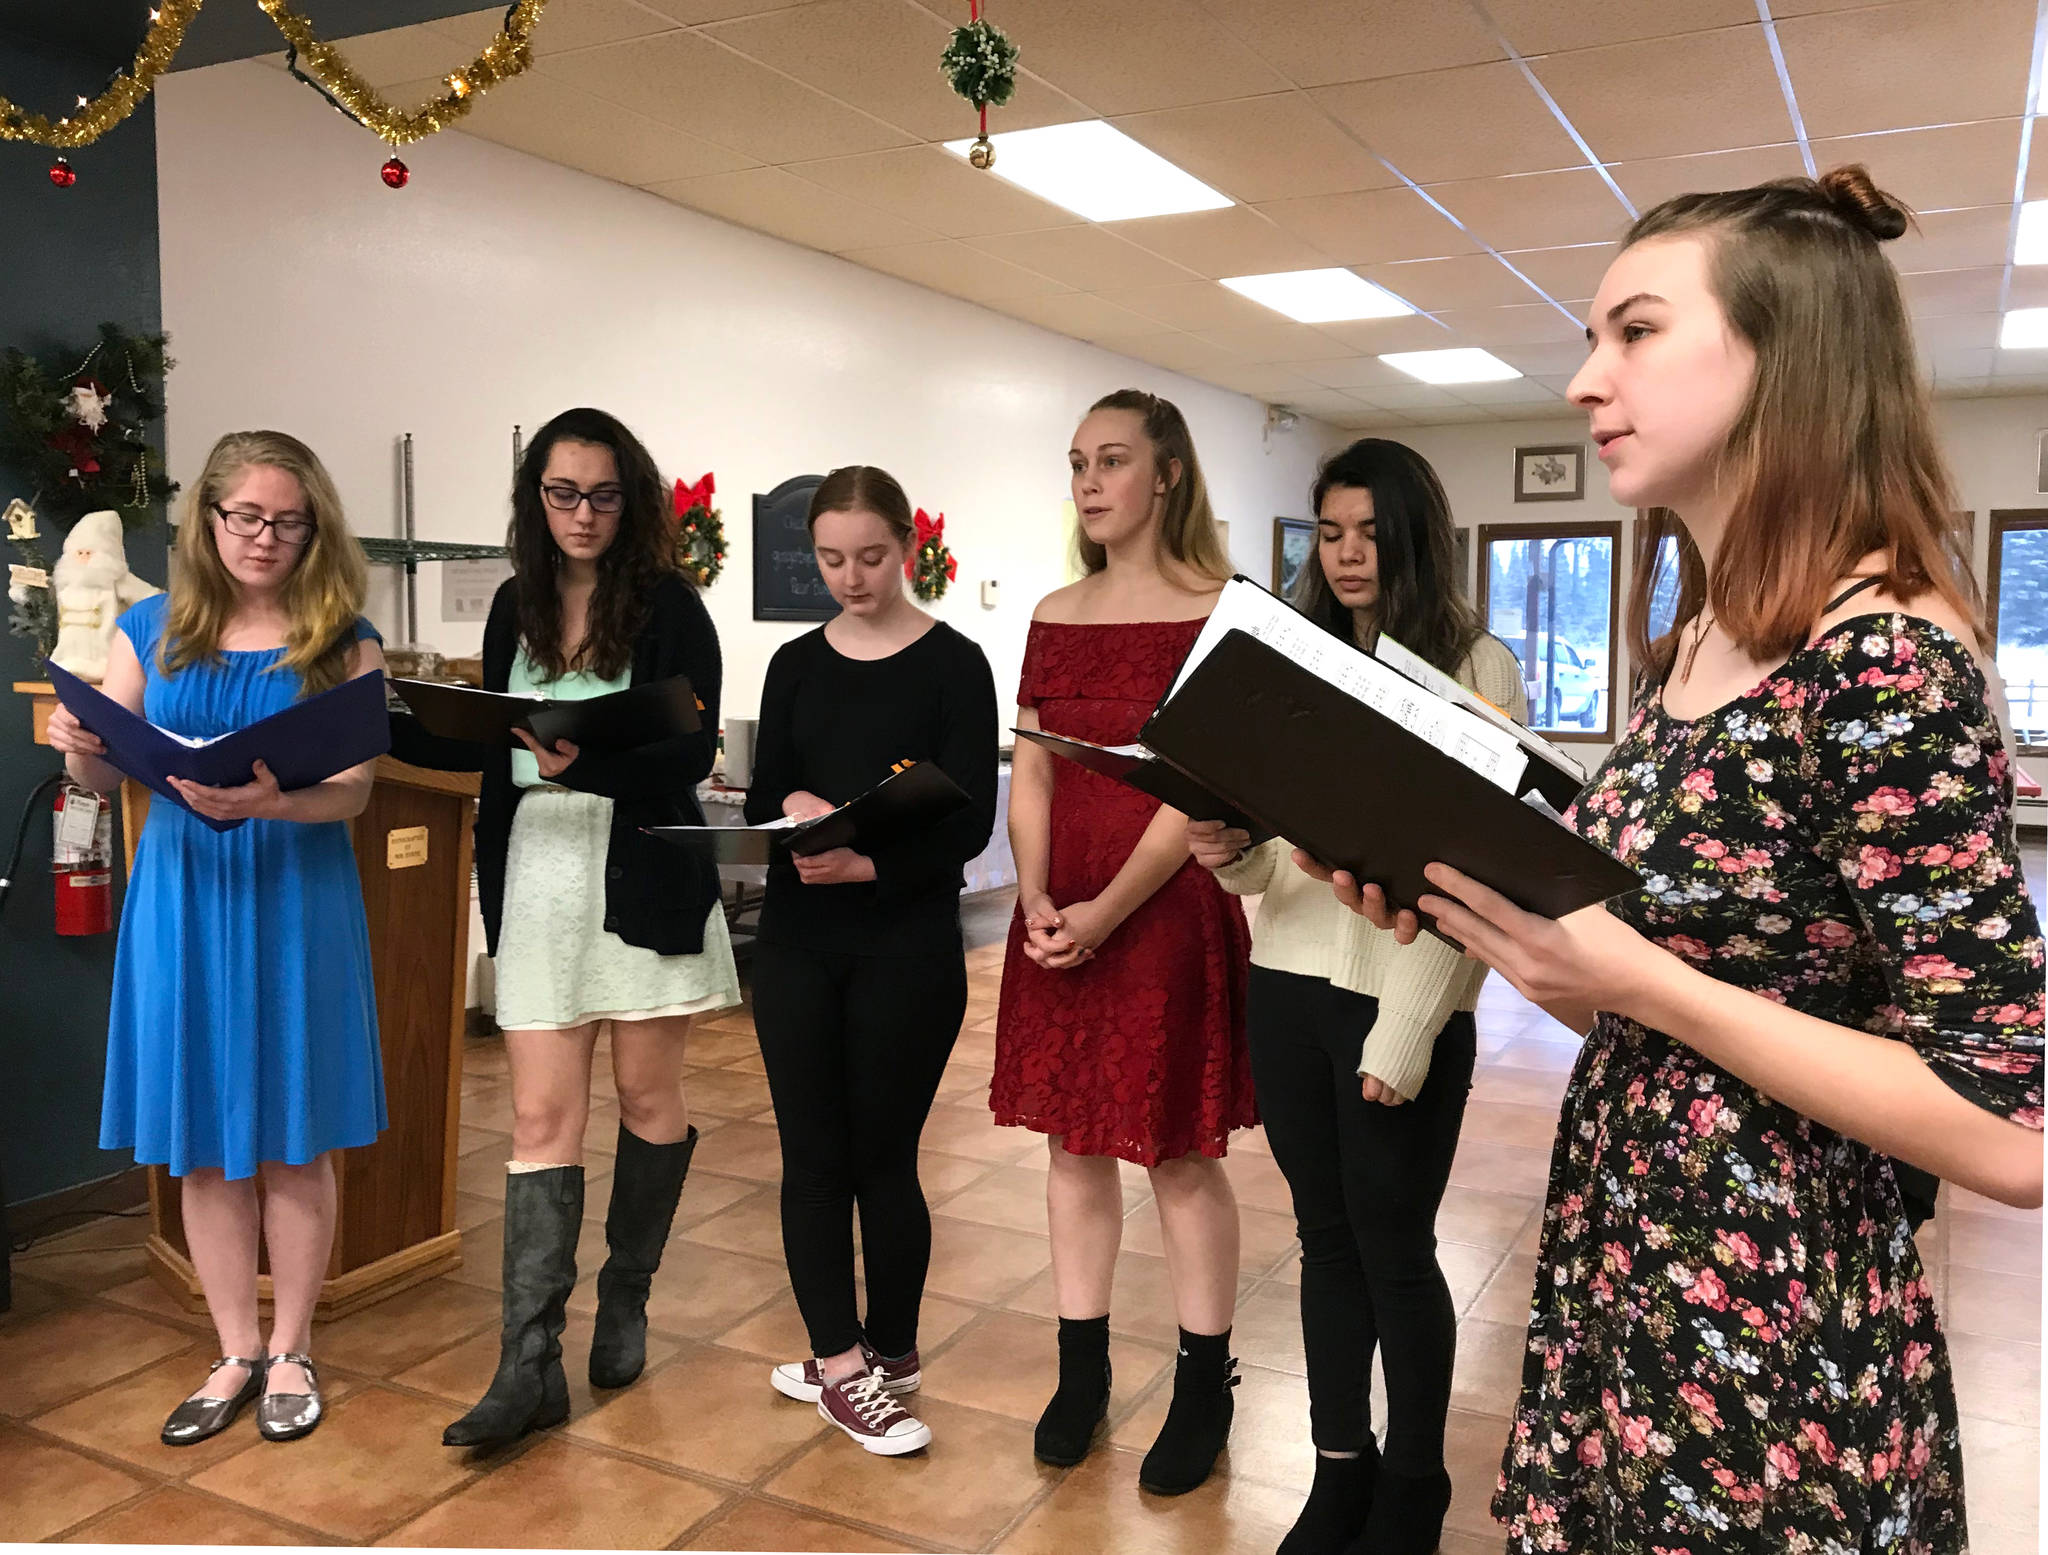 A group of students from Ninilchik School sing Christmas carols at the Ninilchik Senior Center on Tuesday, Dec. 19, 2017. The students practice during their free period since elementary and middle school choir is no longer offered at Ninilchik School. (Photo by Kat Sorensen/Peninsula Clarion)